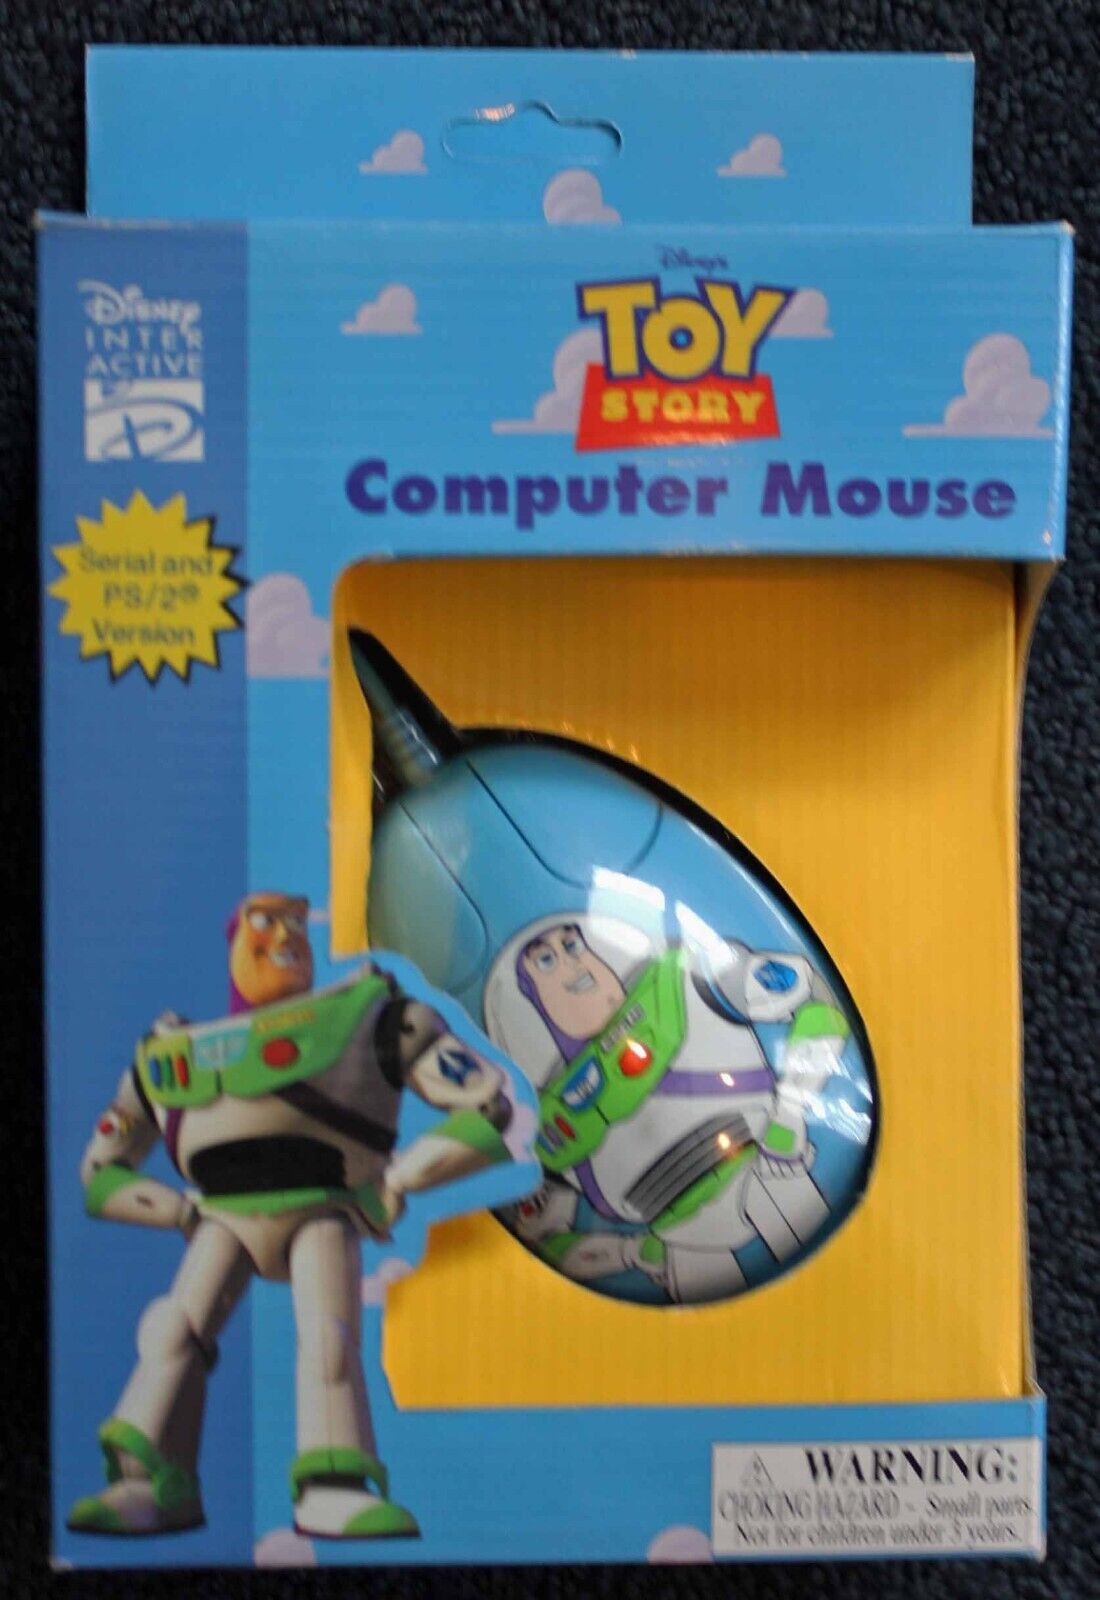 Toy Story Vintage Buzz Lightyear Mouse Serial and PS/2 Version